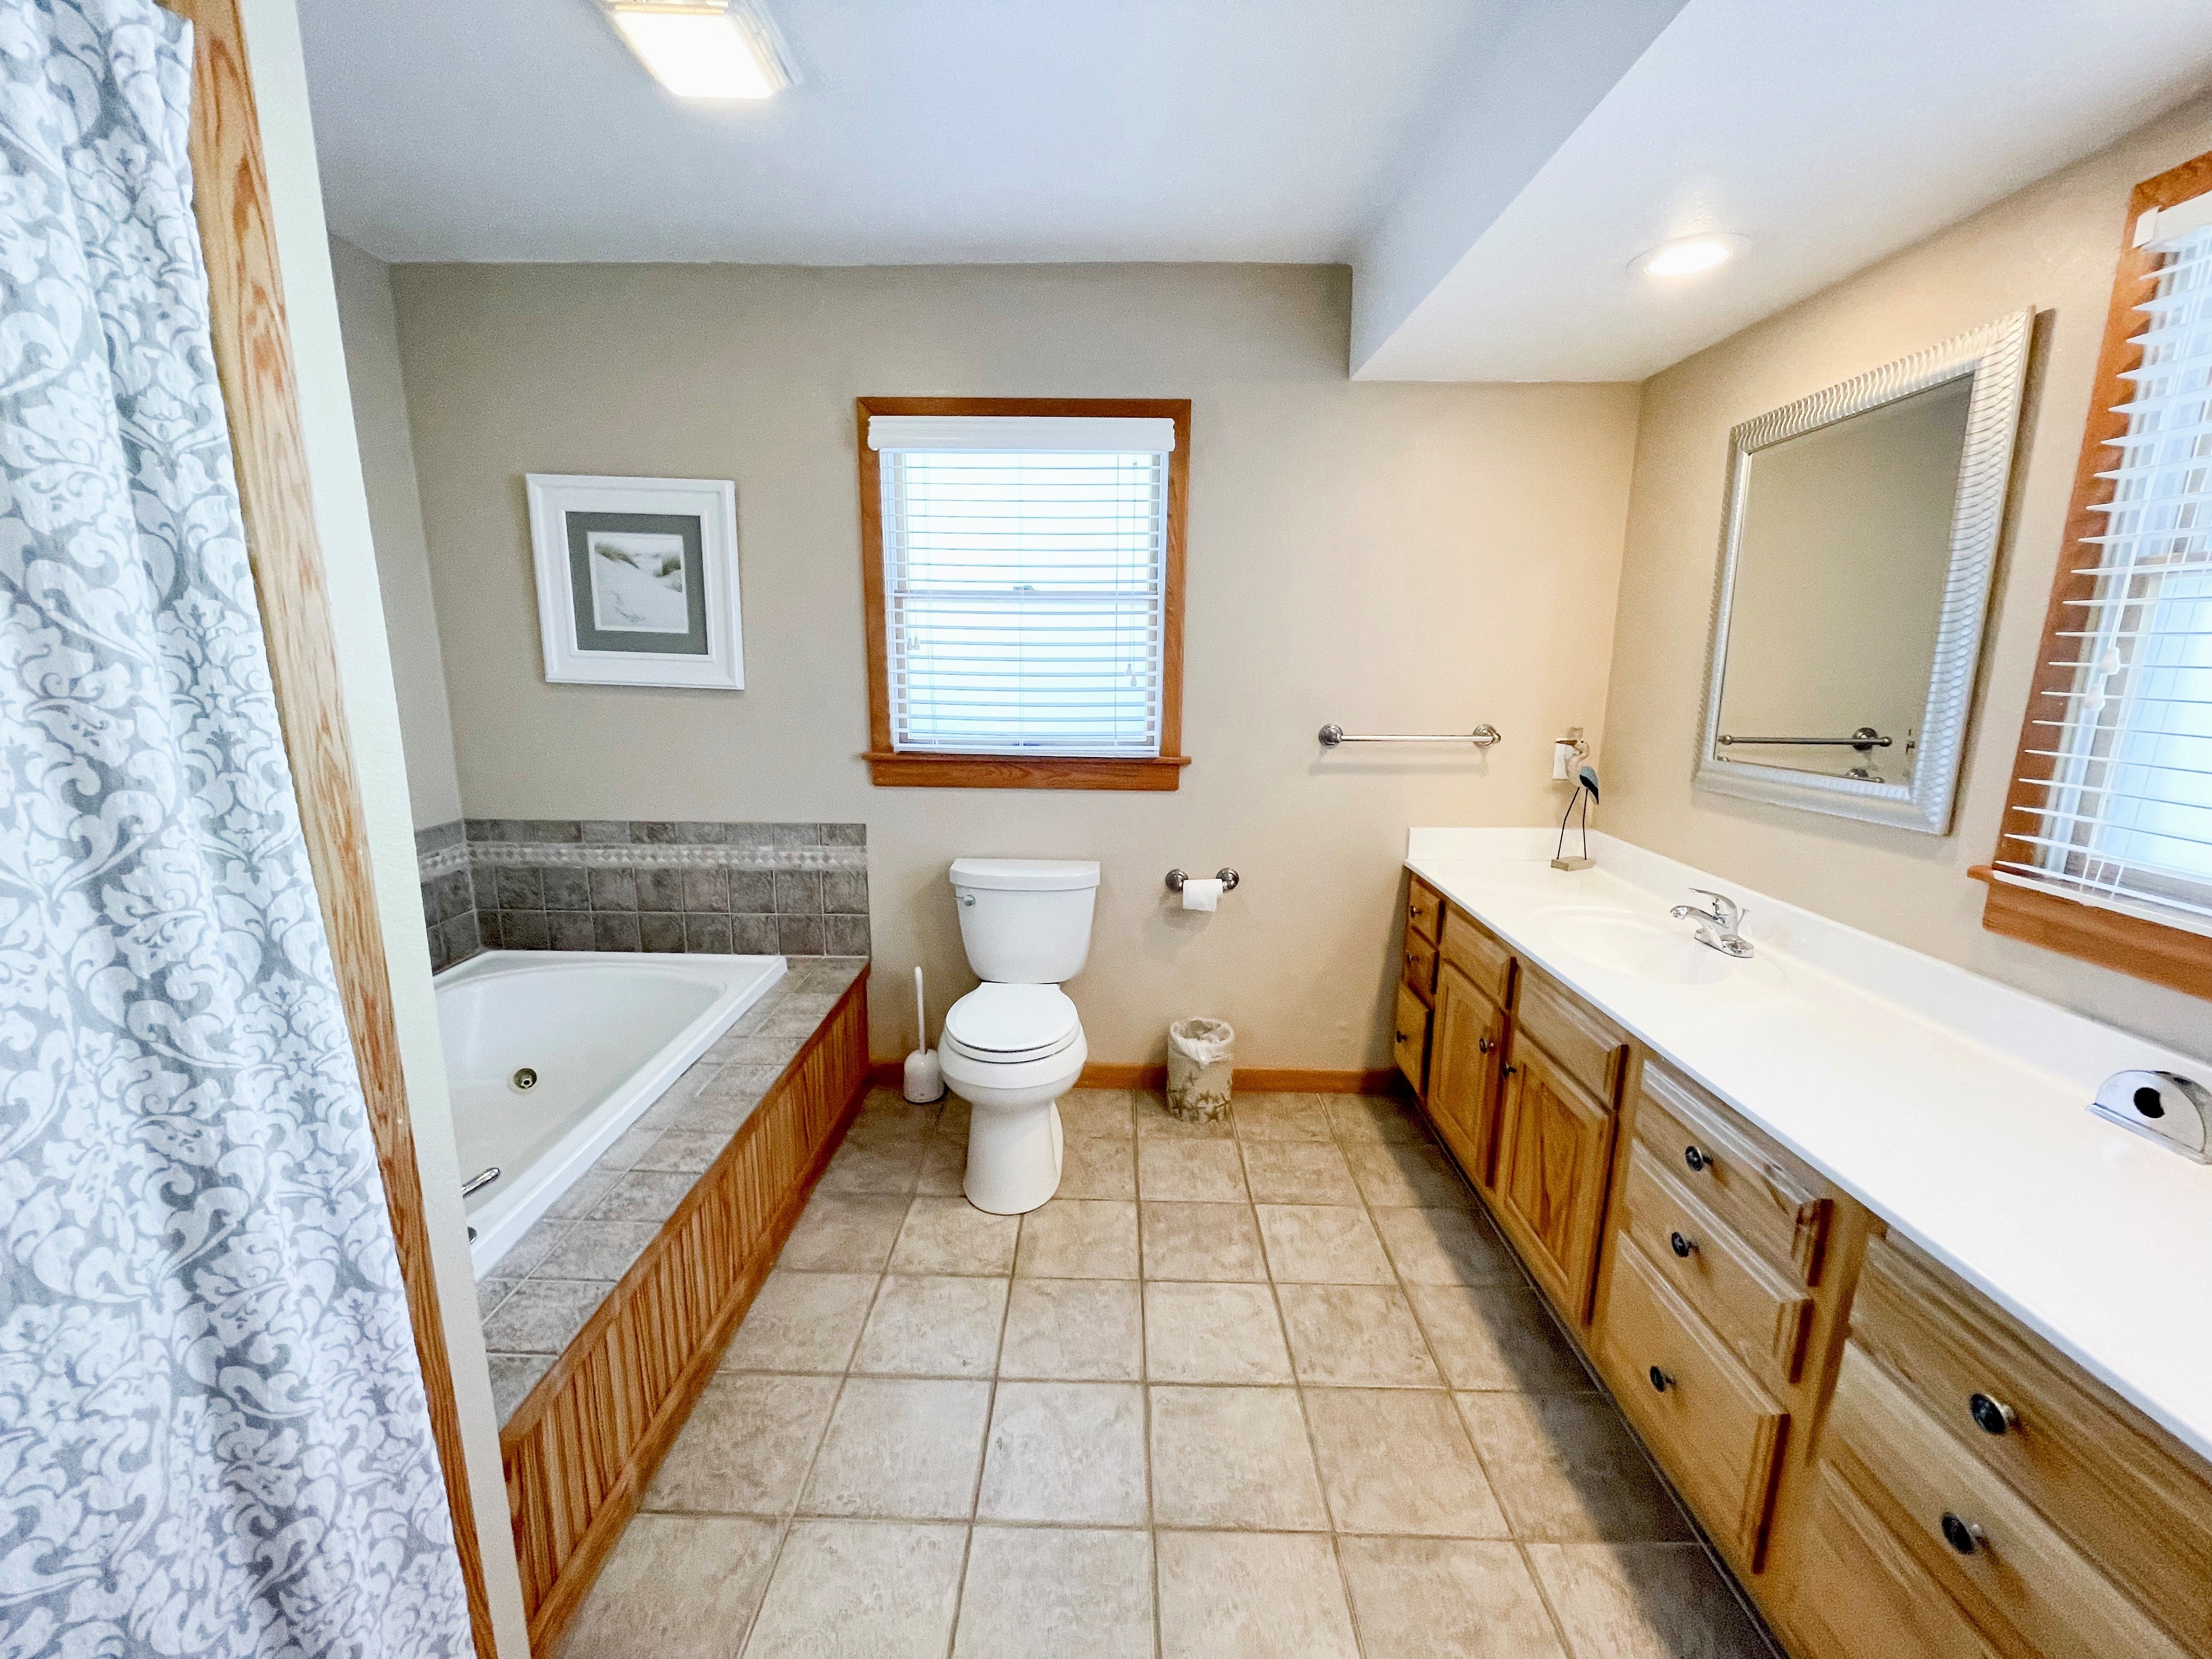 Second Floor Full Bath with Double Sinks, Shower and Whirlpool Tub